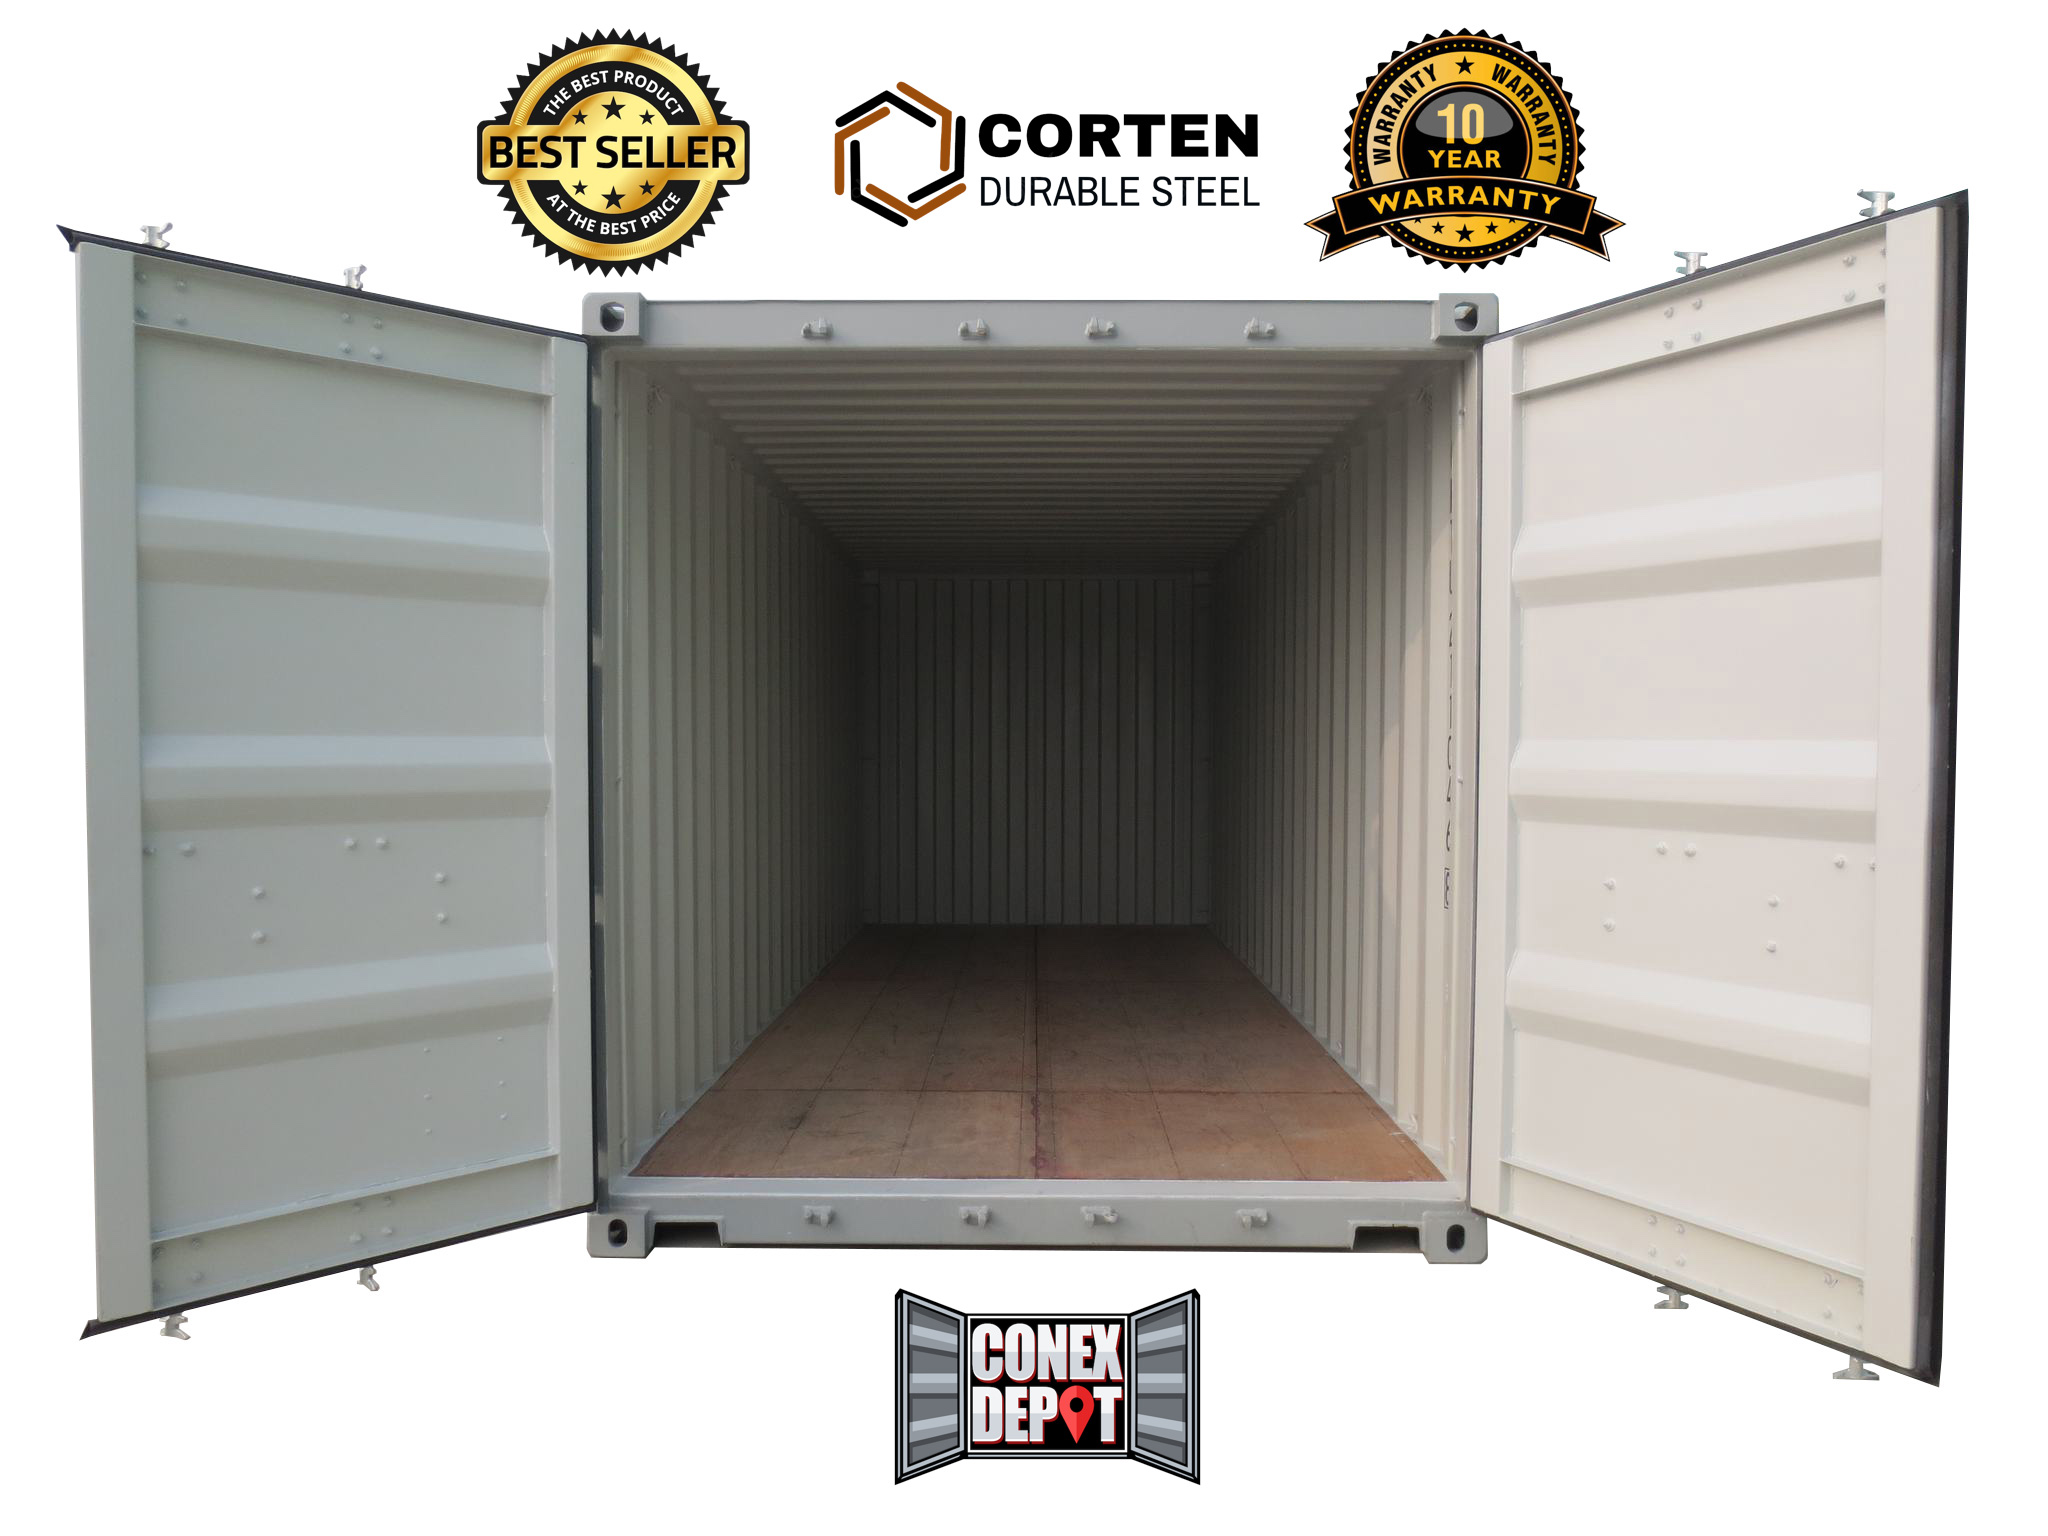 Quality New & Used Shipping Containers For Sale at Conex Depot